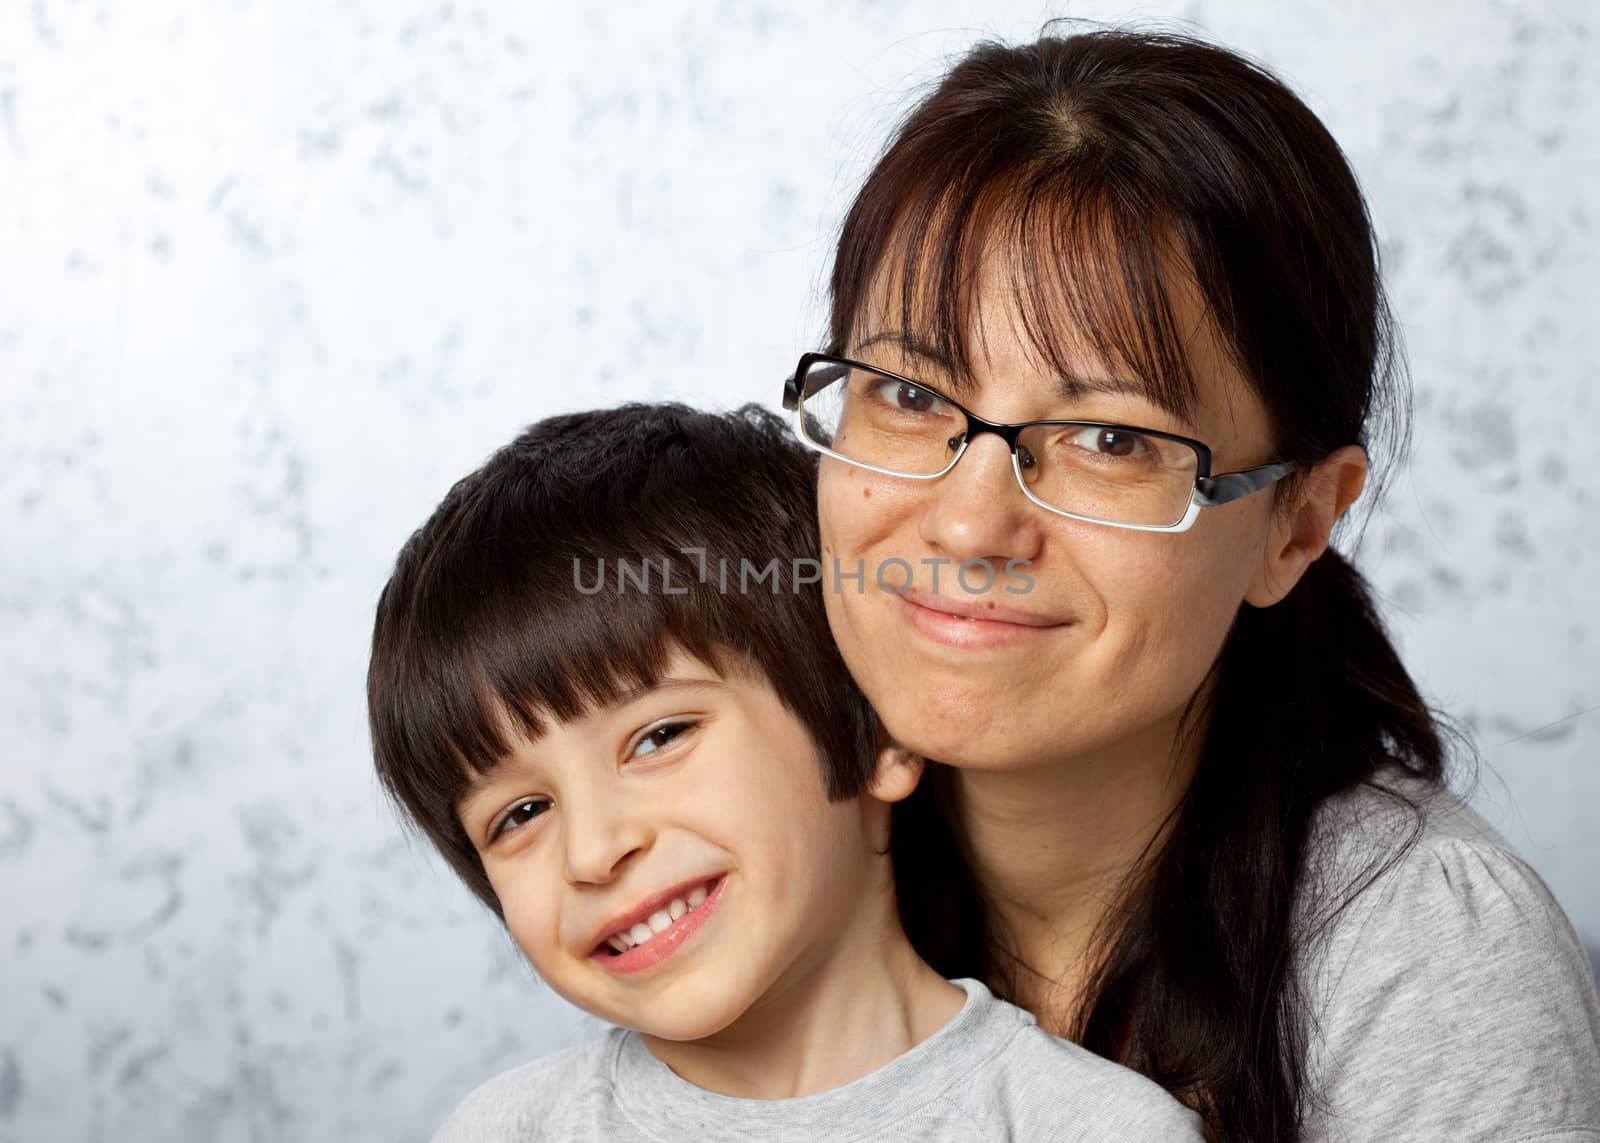 Smiling happy mother and son